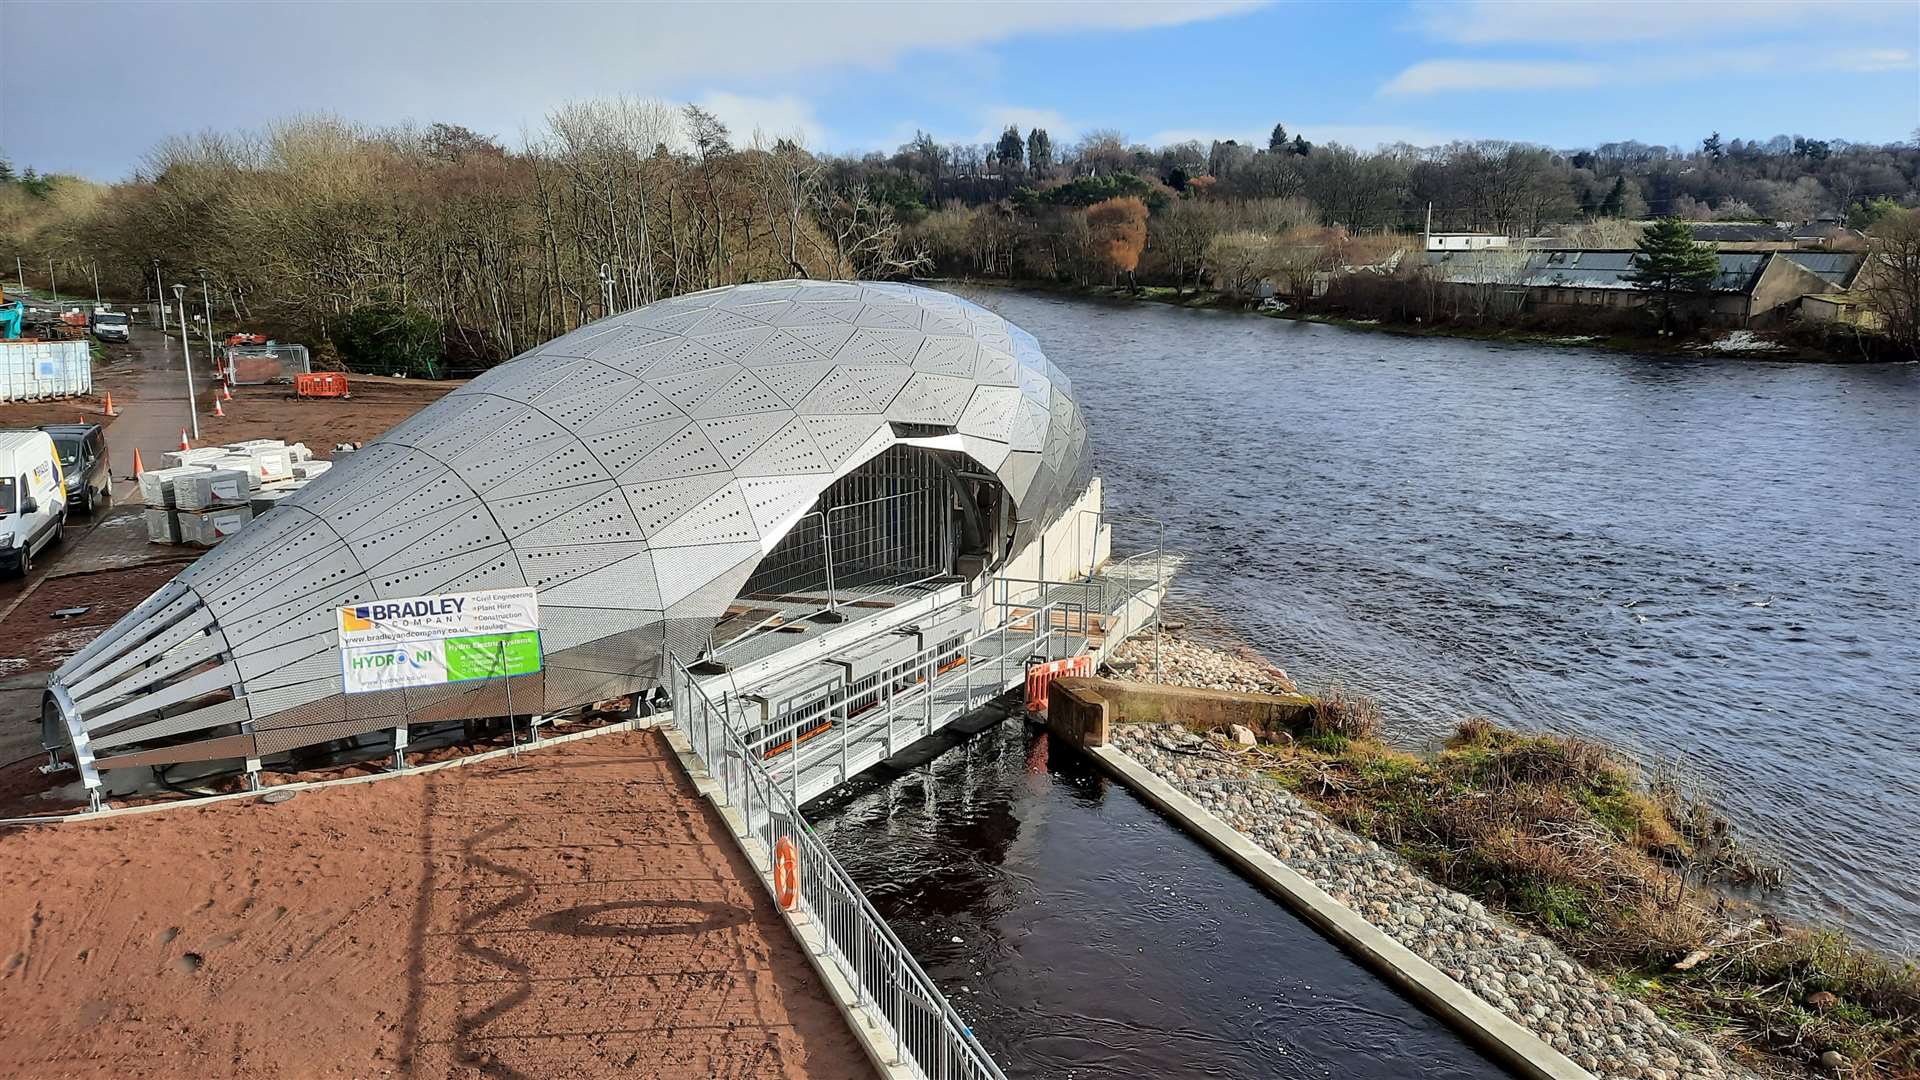 The new Hydro Ness scheme under construction beside the River Ness.